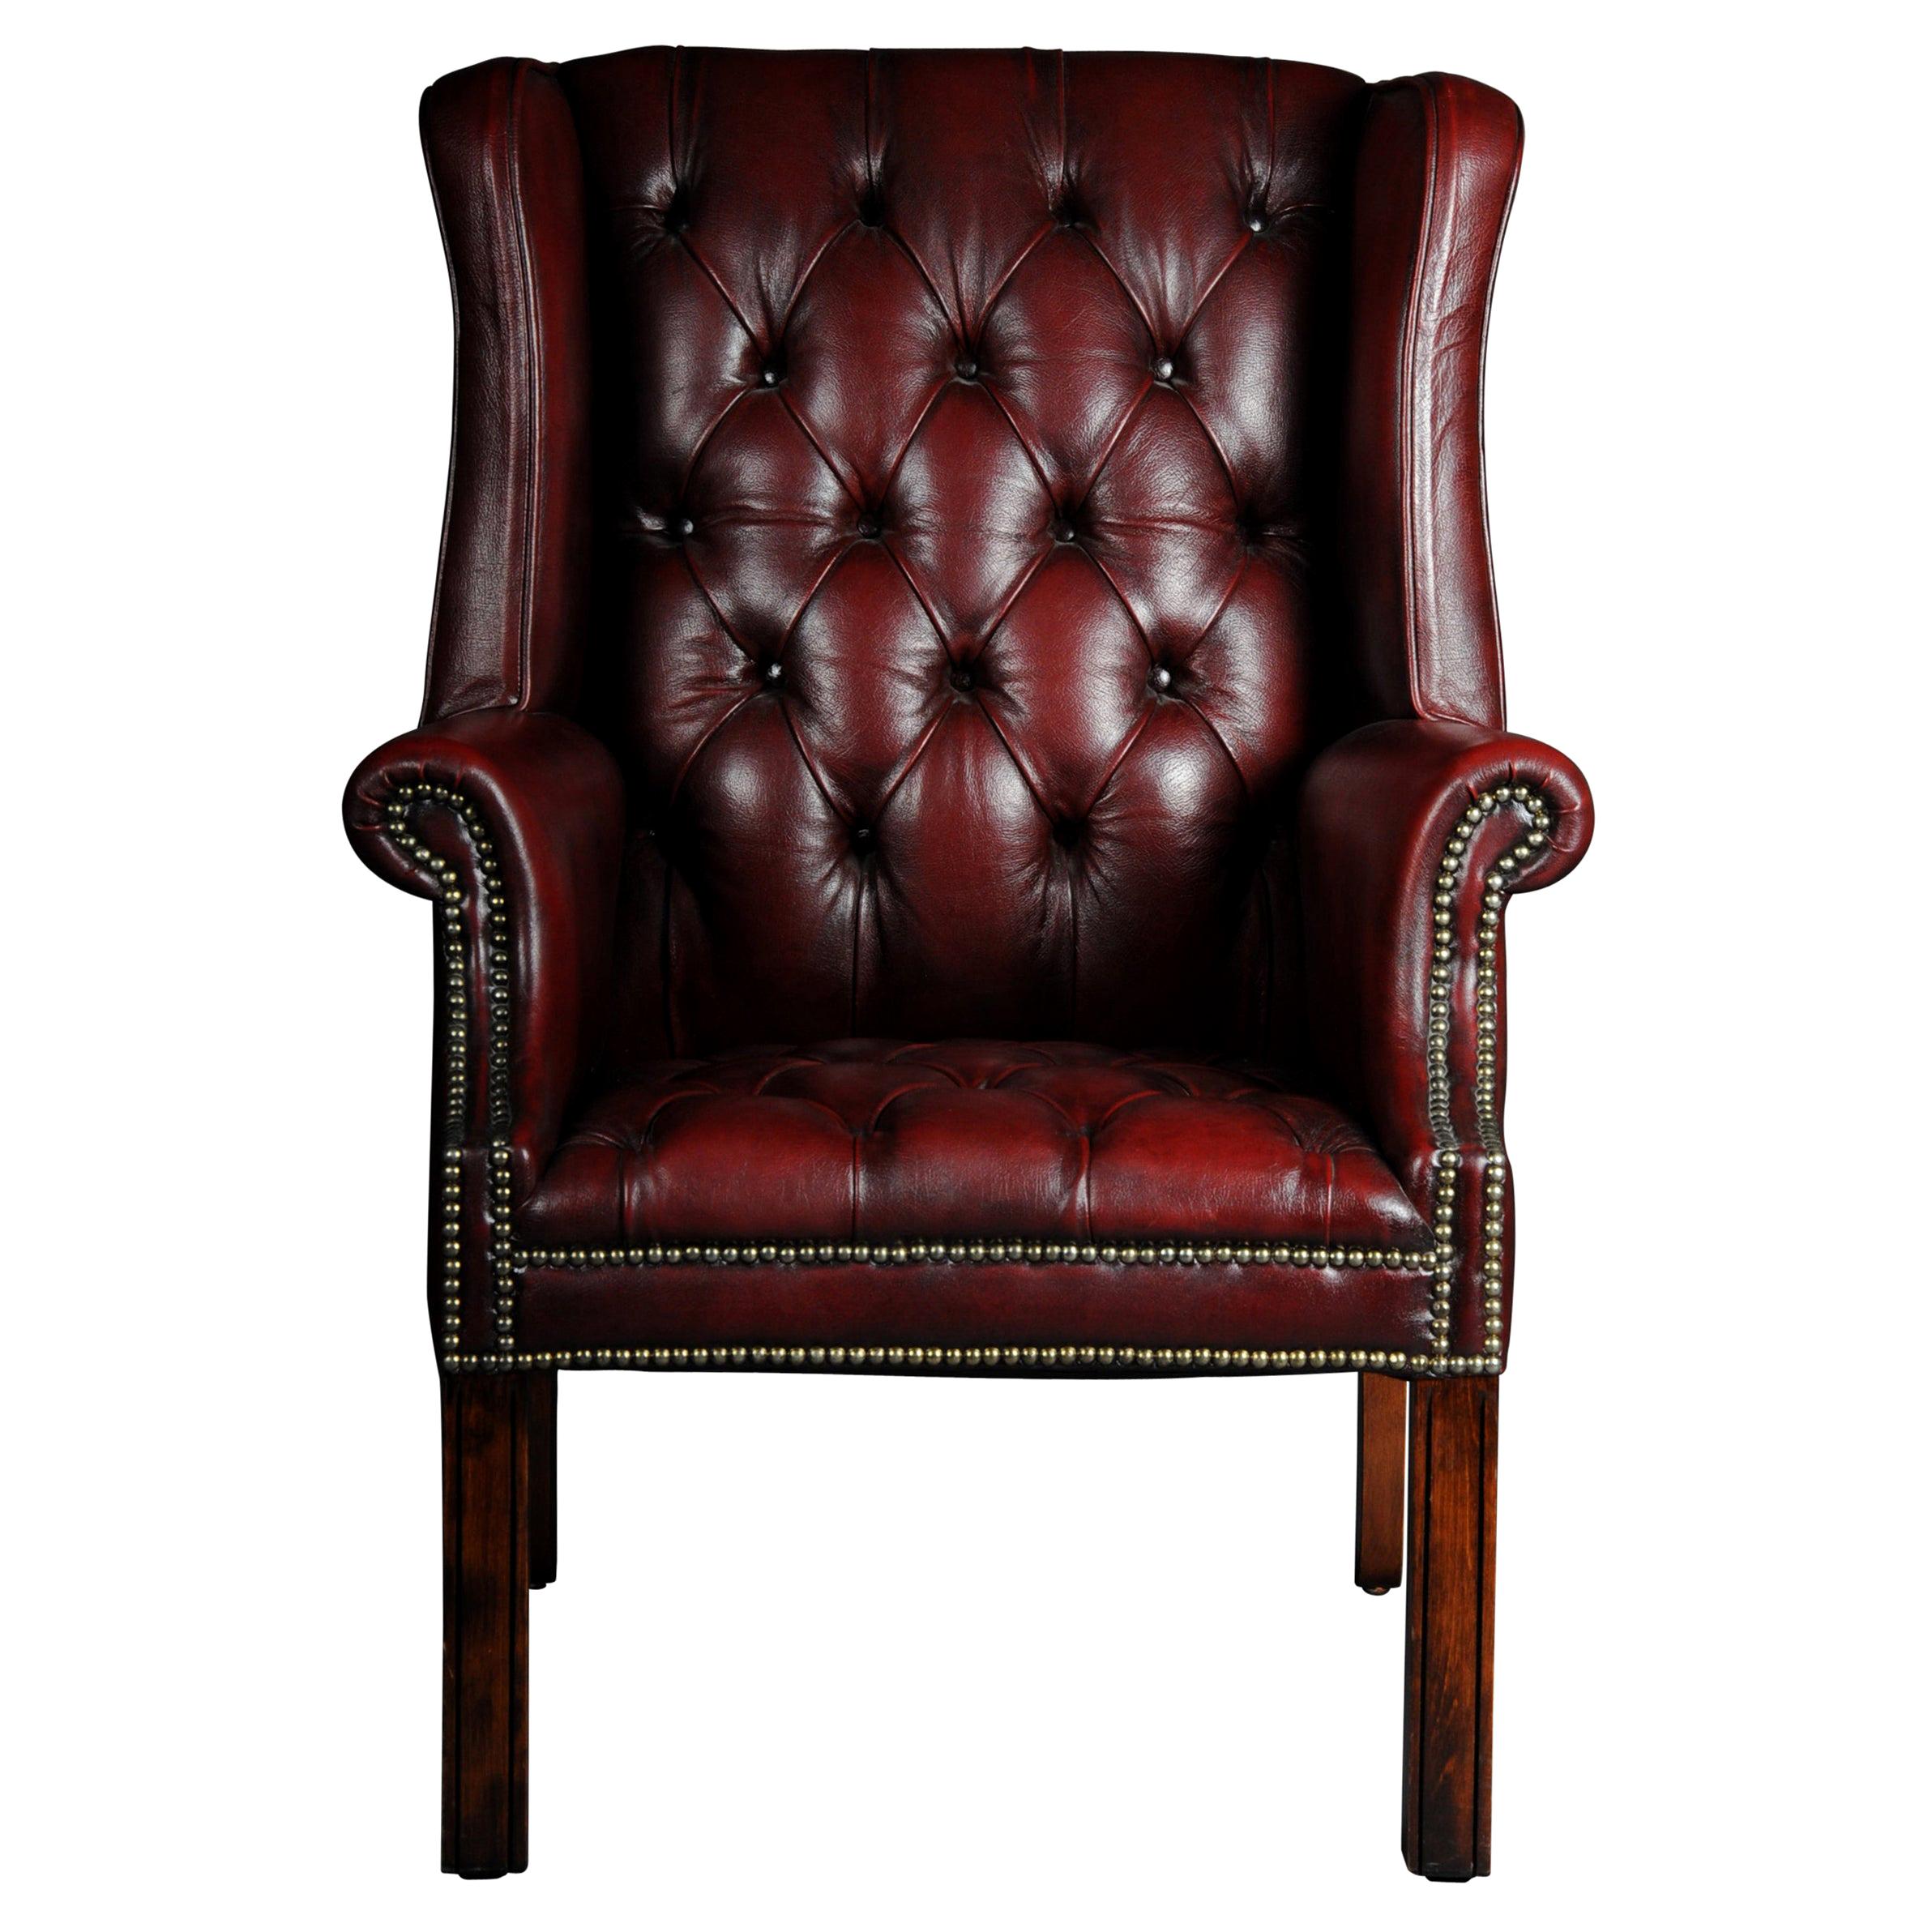 20th Century Classic English Chesterfield Earsback Chair, Leather